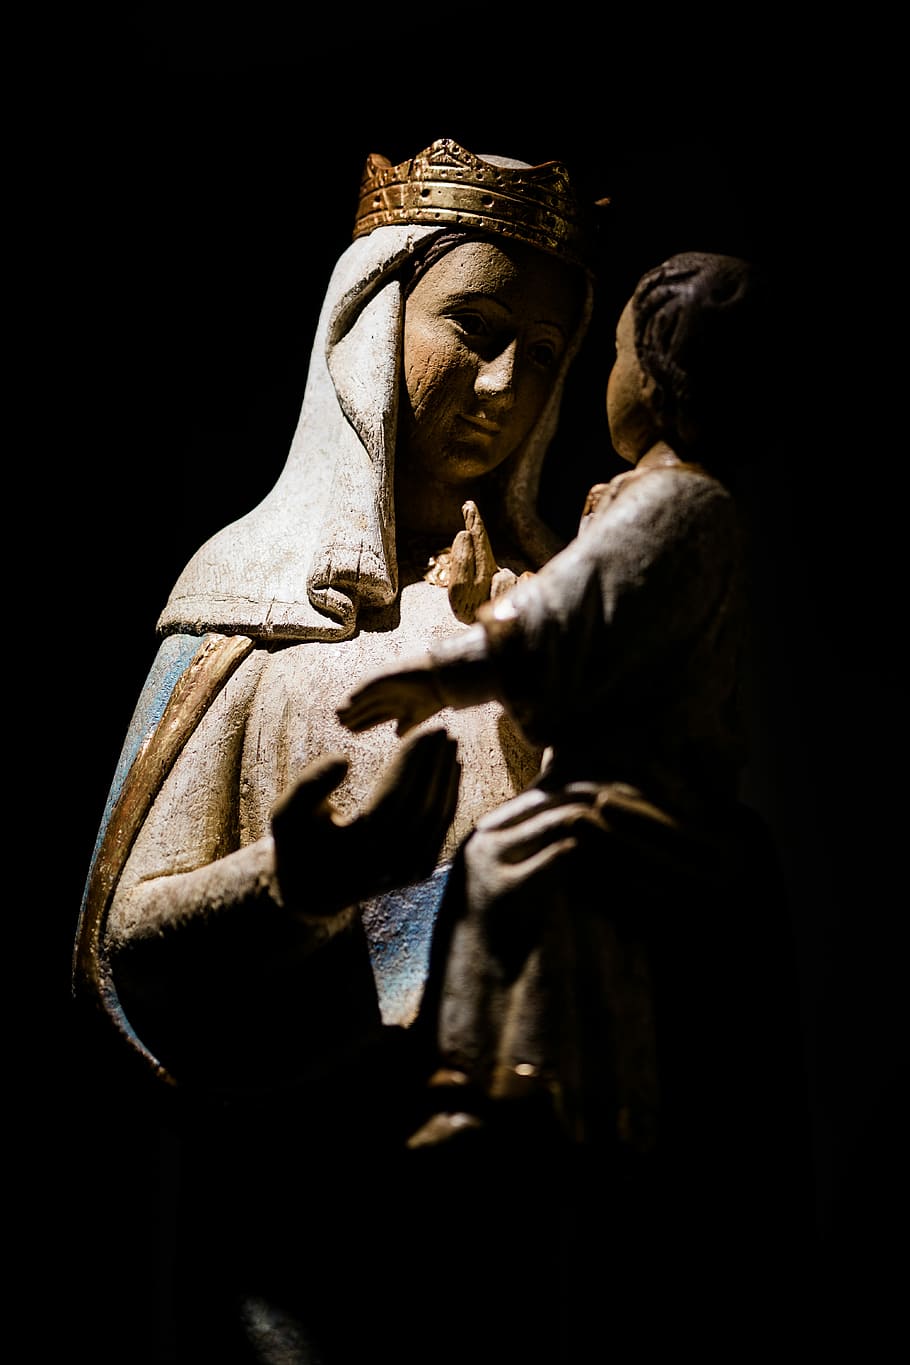 HD wallpaper: Mary and Jesus Christ figurine, virgin mary, carving